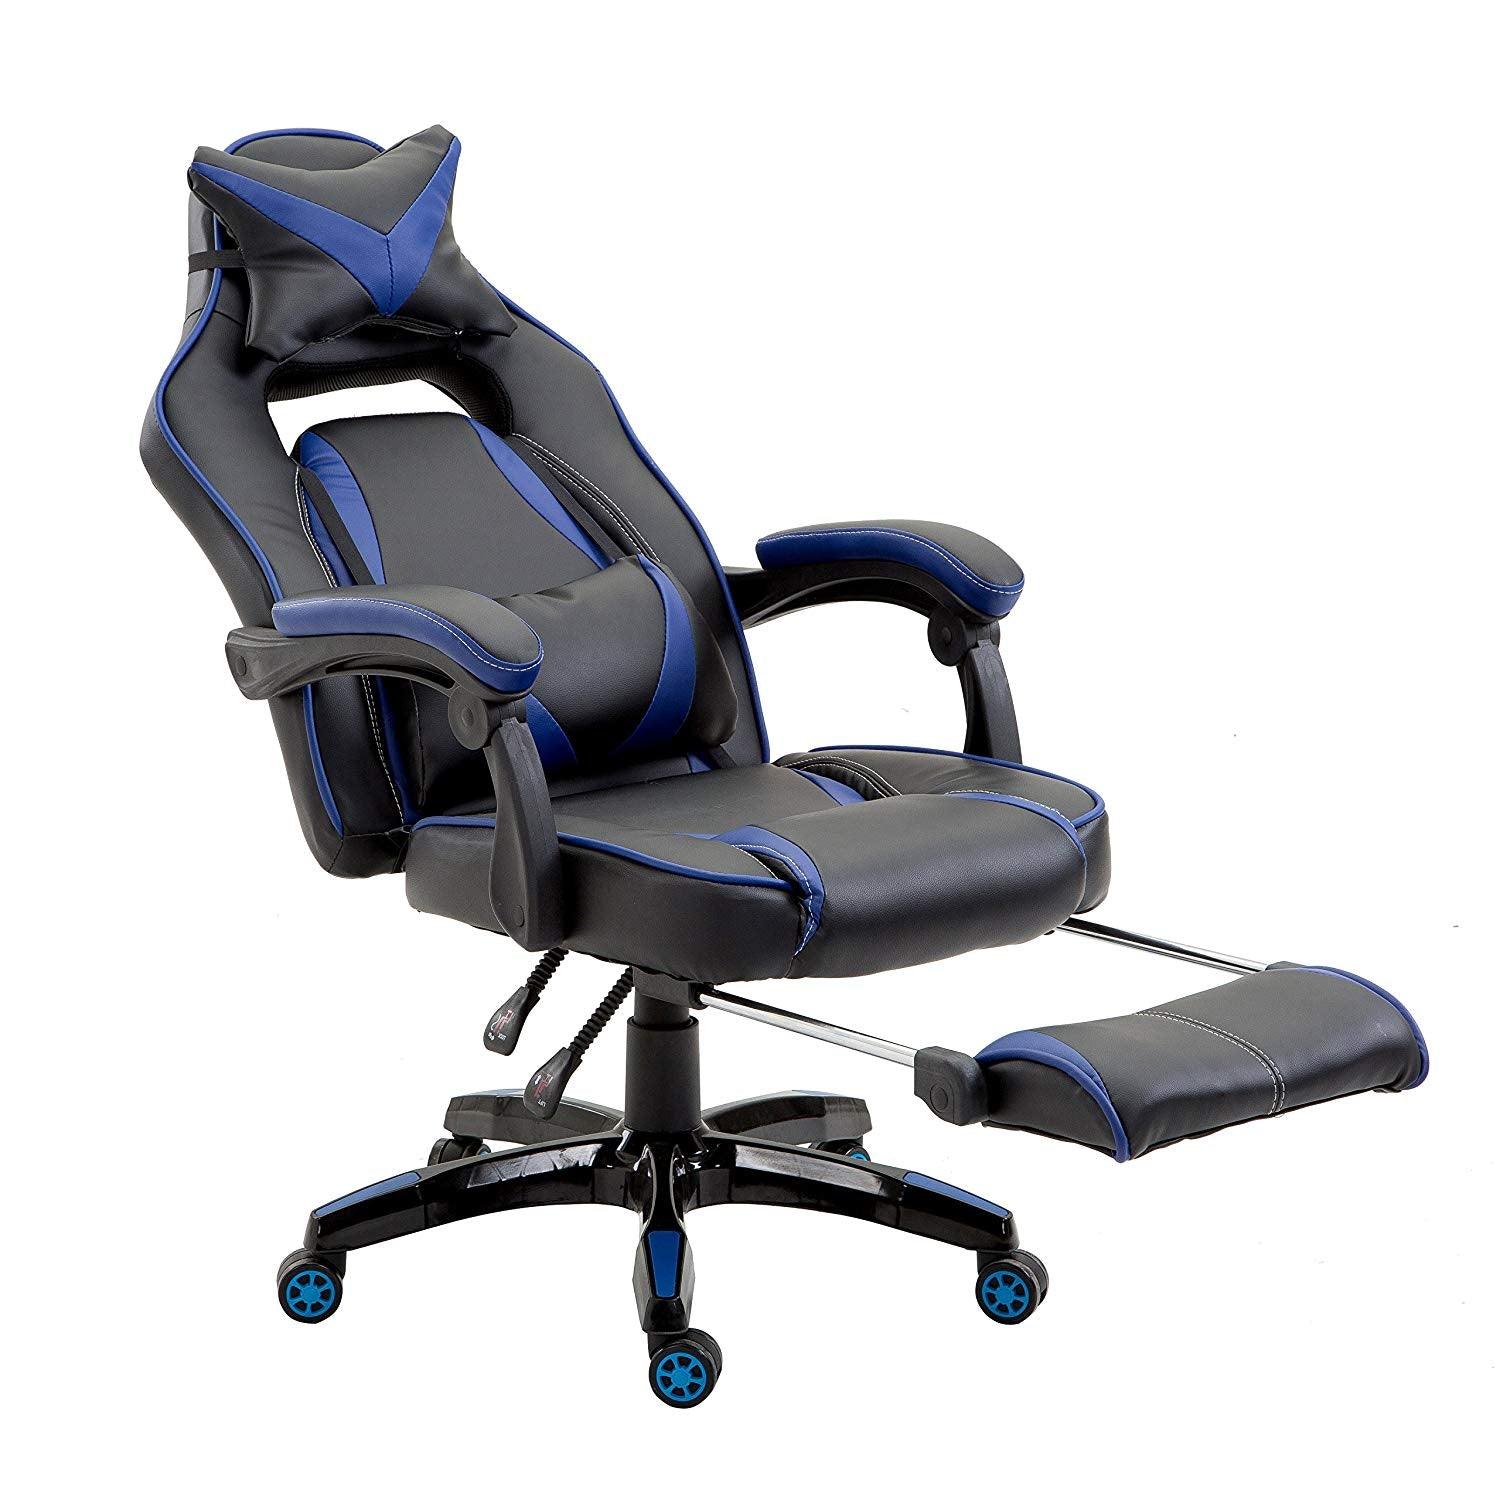 High Back Recliner Gaming Swivel Chair with Footrest & Adjustable Lumbar & Head Cushion, MR49 Black & Blue